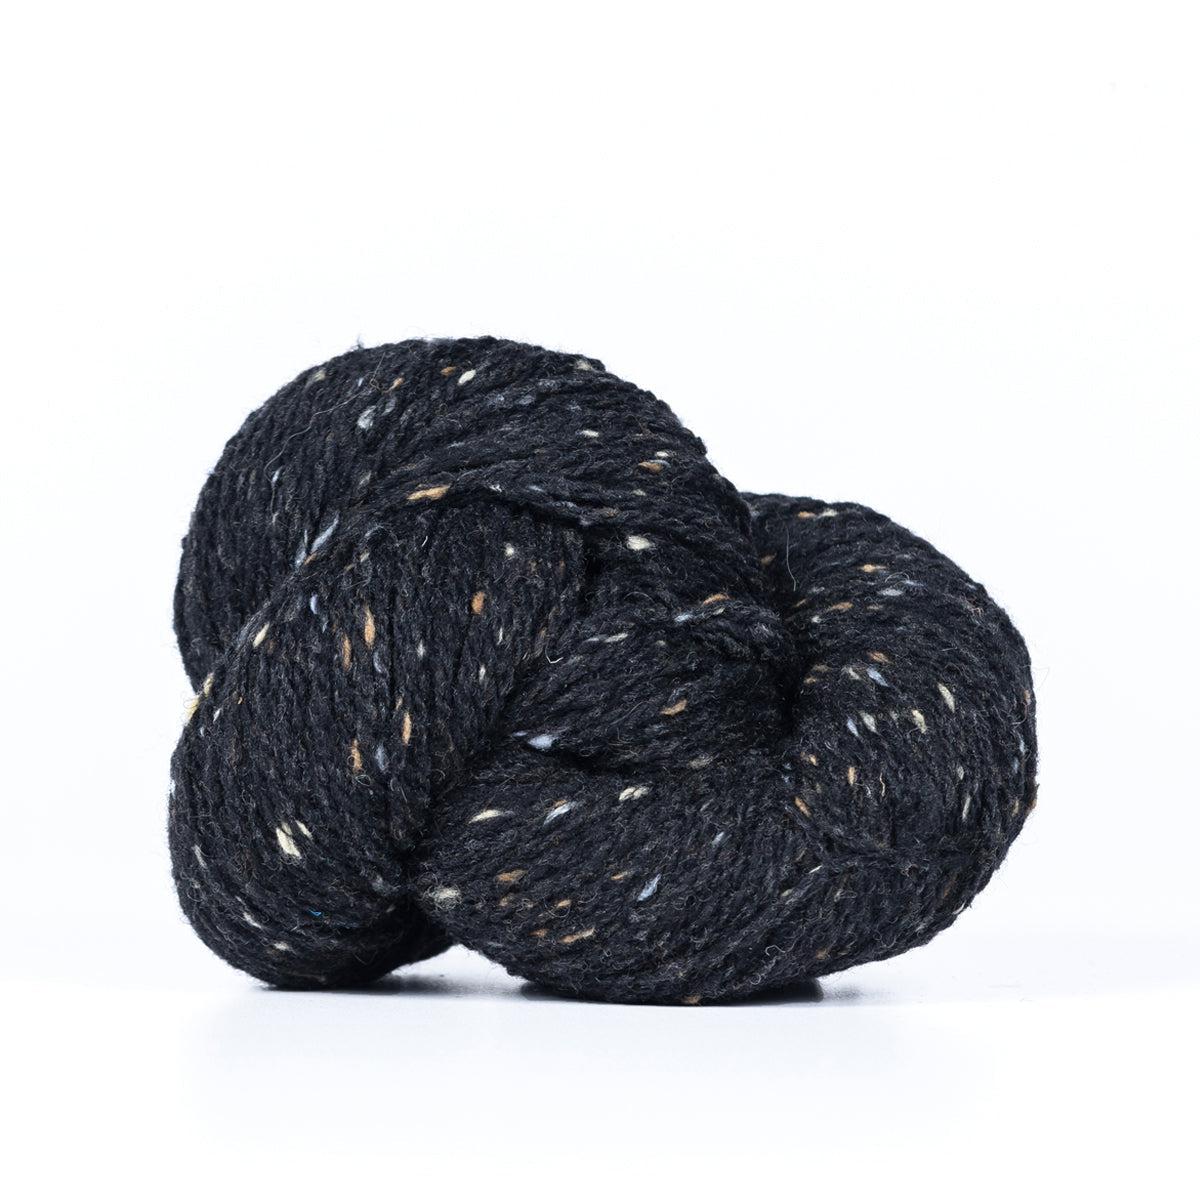 A skein of Kelbourne Woolens Lucky Tweed Black, a black tweed with cream, light brown and grey.